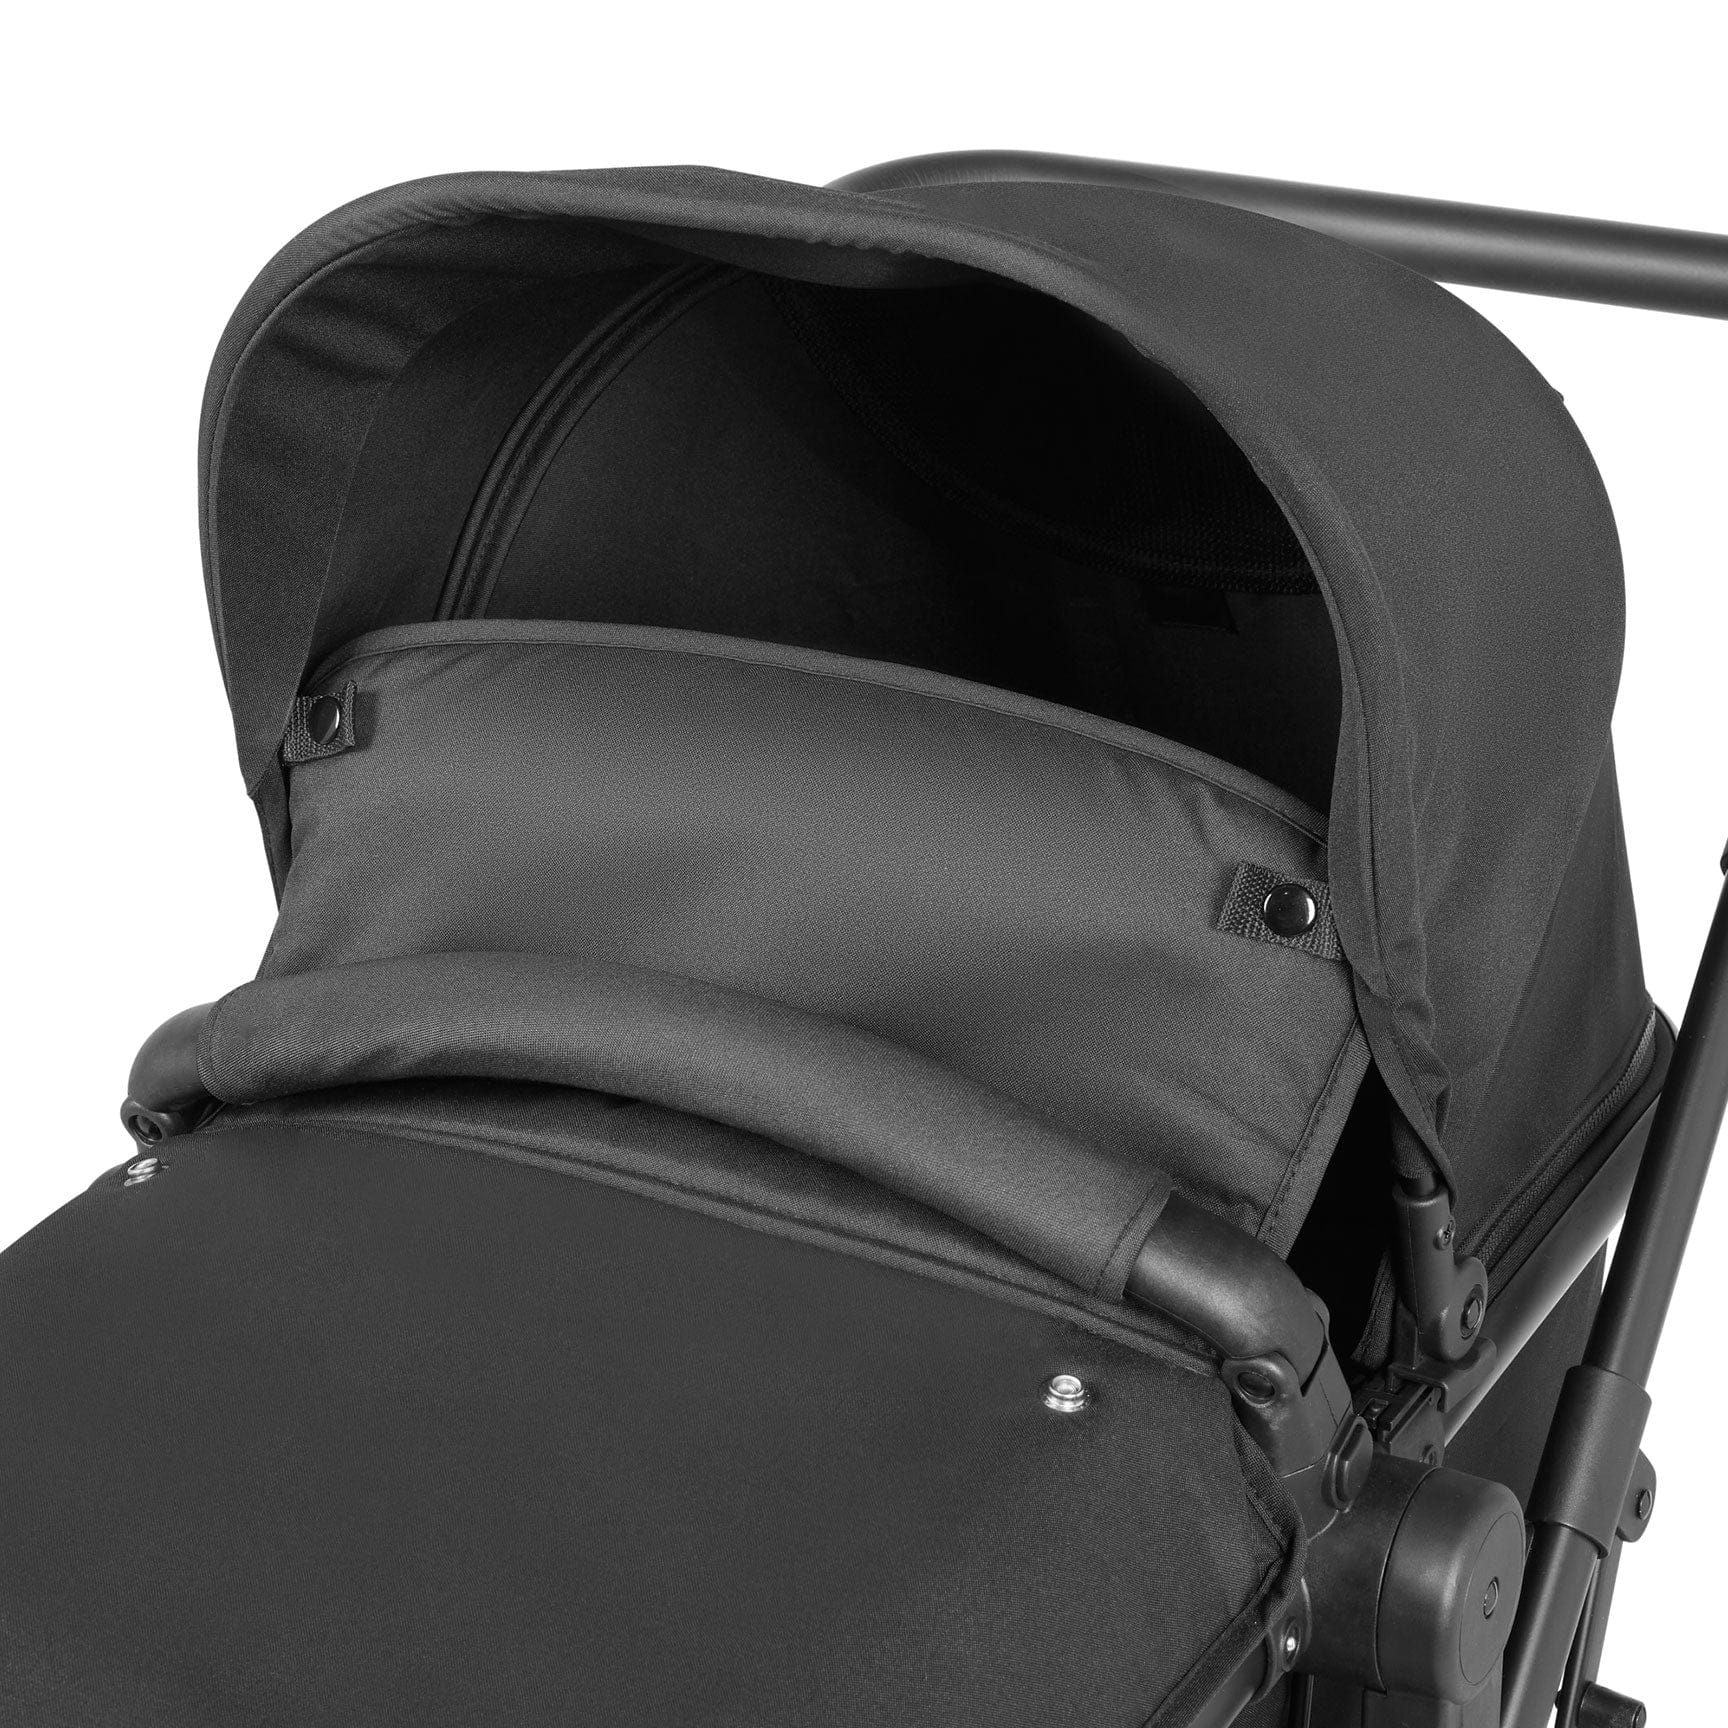 Ickle Bubba Comet 2 in 1 Plus Carrycot & Pushchair in Black